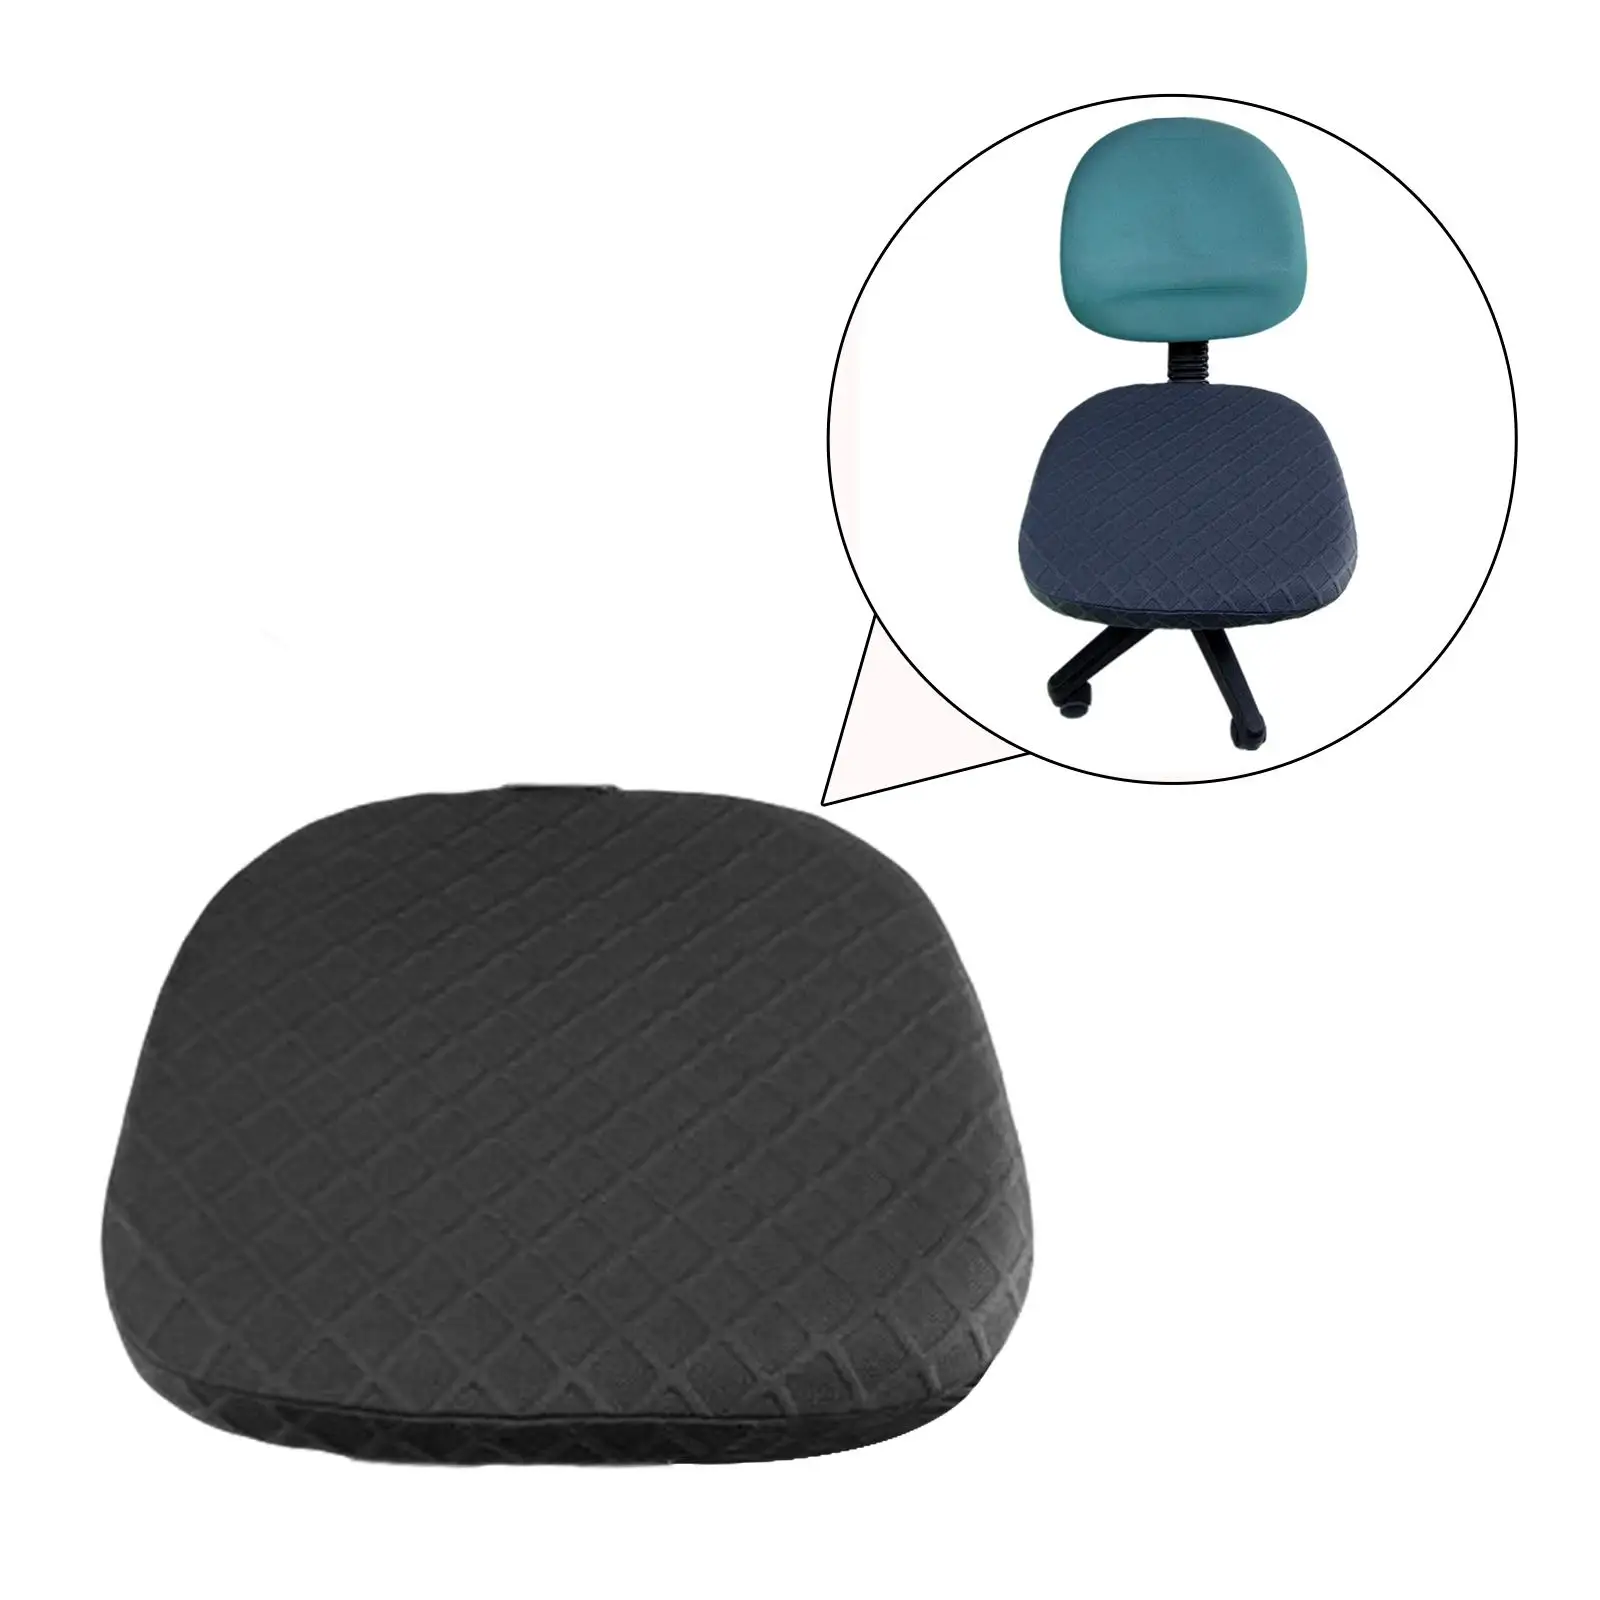 Stretch Jacquard Office Chair Seat Cushion Cover Protector Washable with Elastic Band Reusable Wrinkle Resistance Durable Fabric